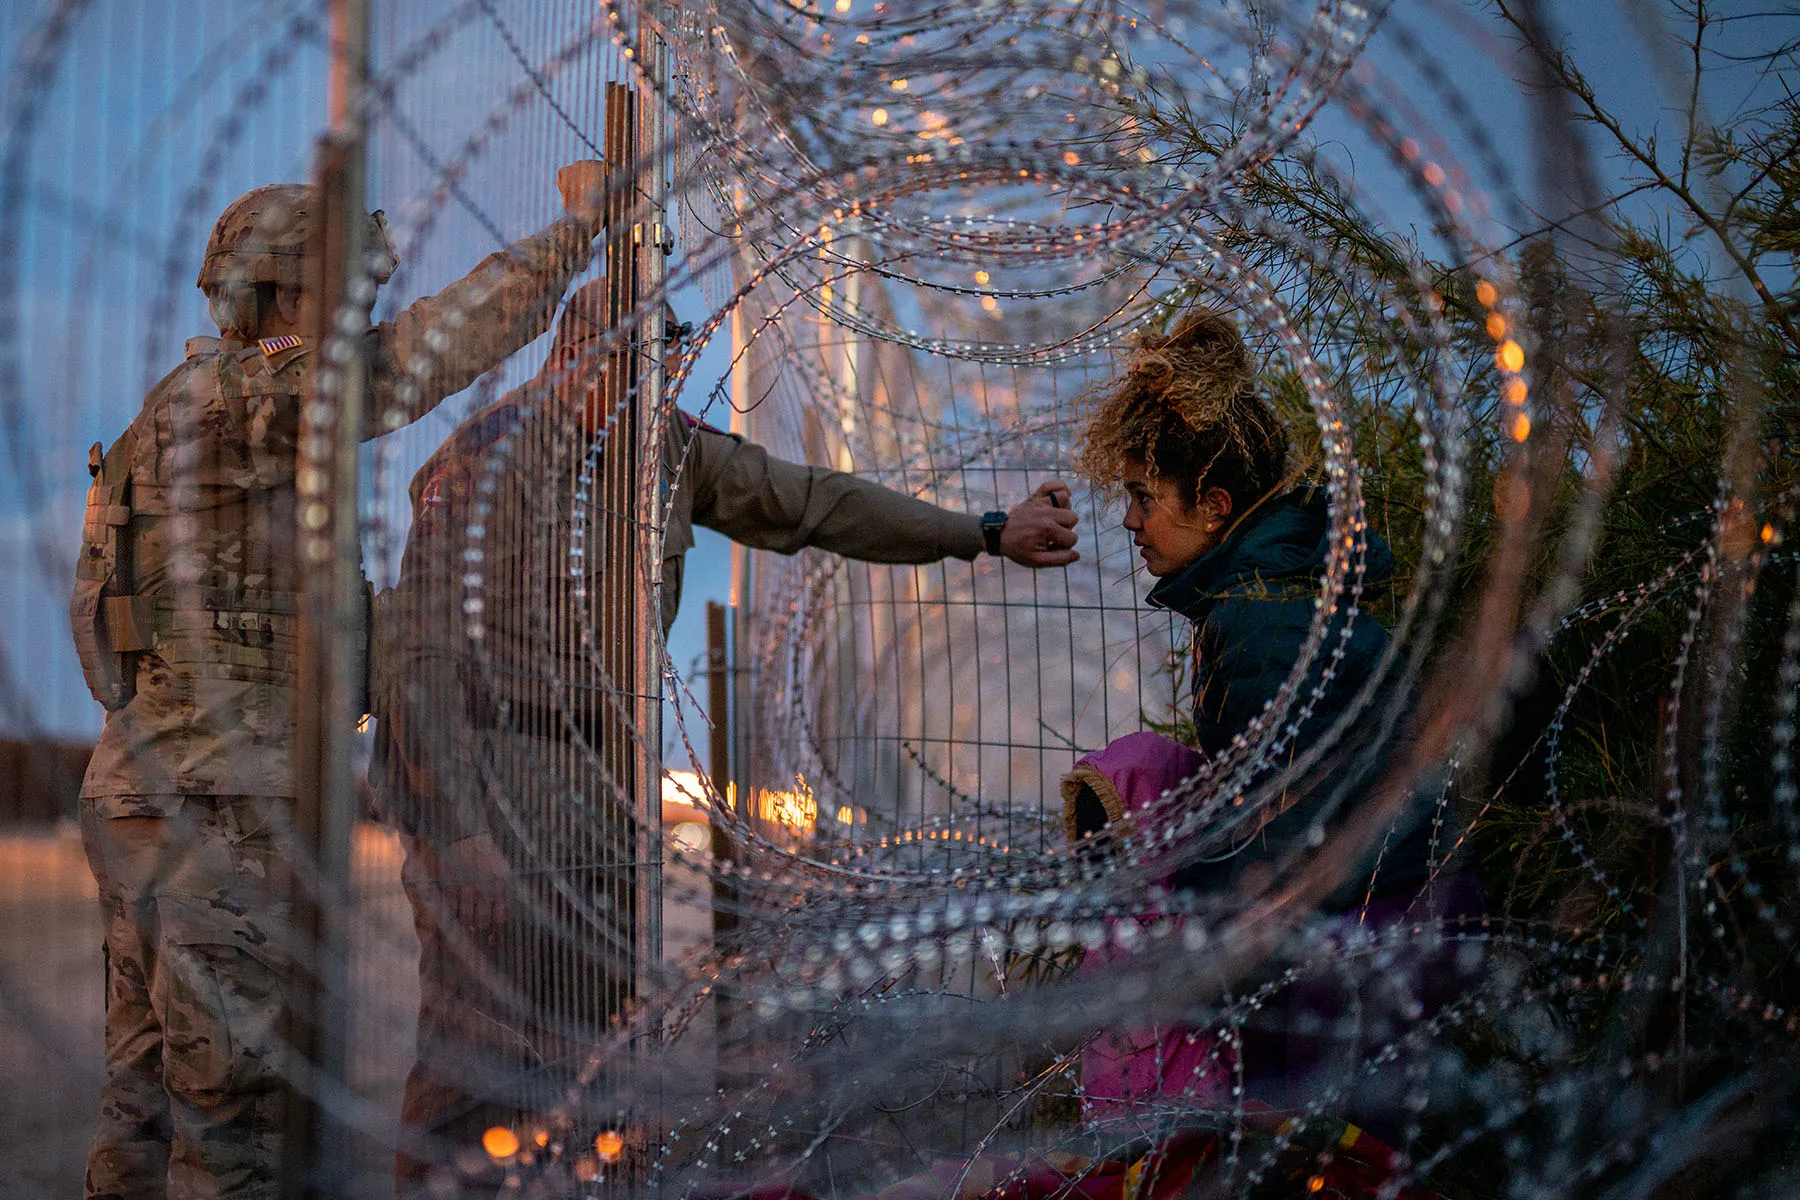 A 22-year-old migrant from Venezuela holds her 3-year-old daughter while being denied entry after attempting to cross through concertina wire.